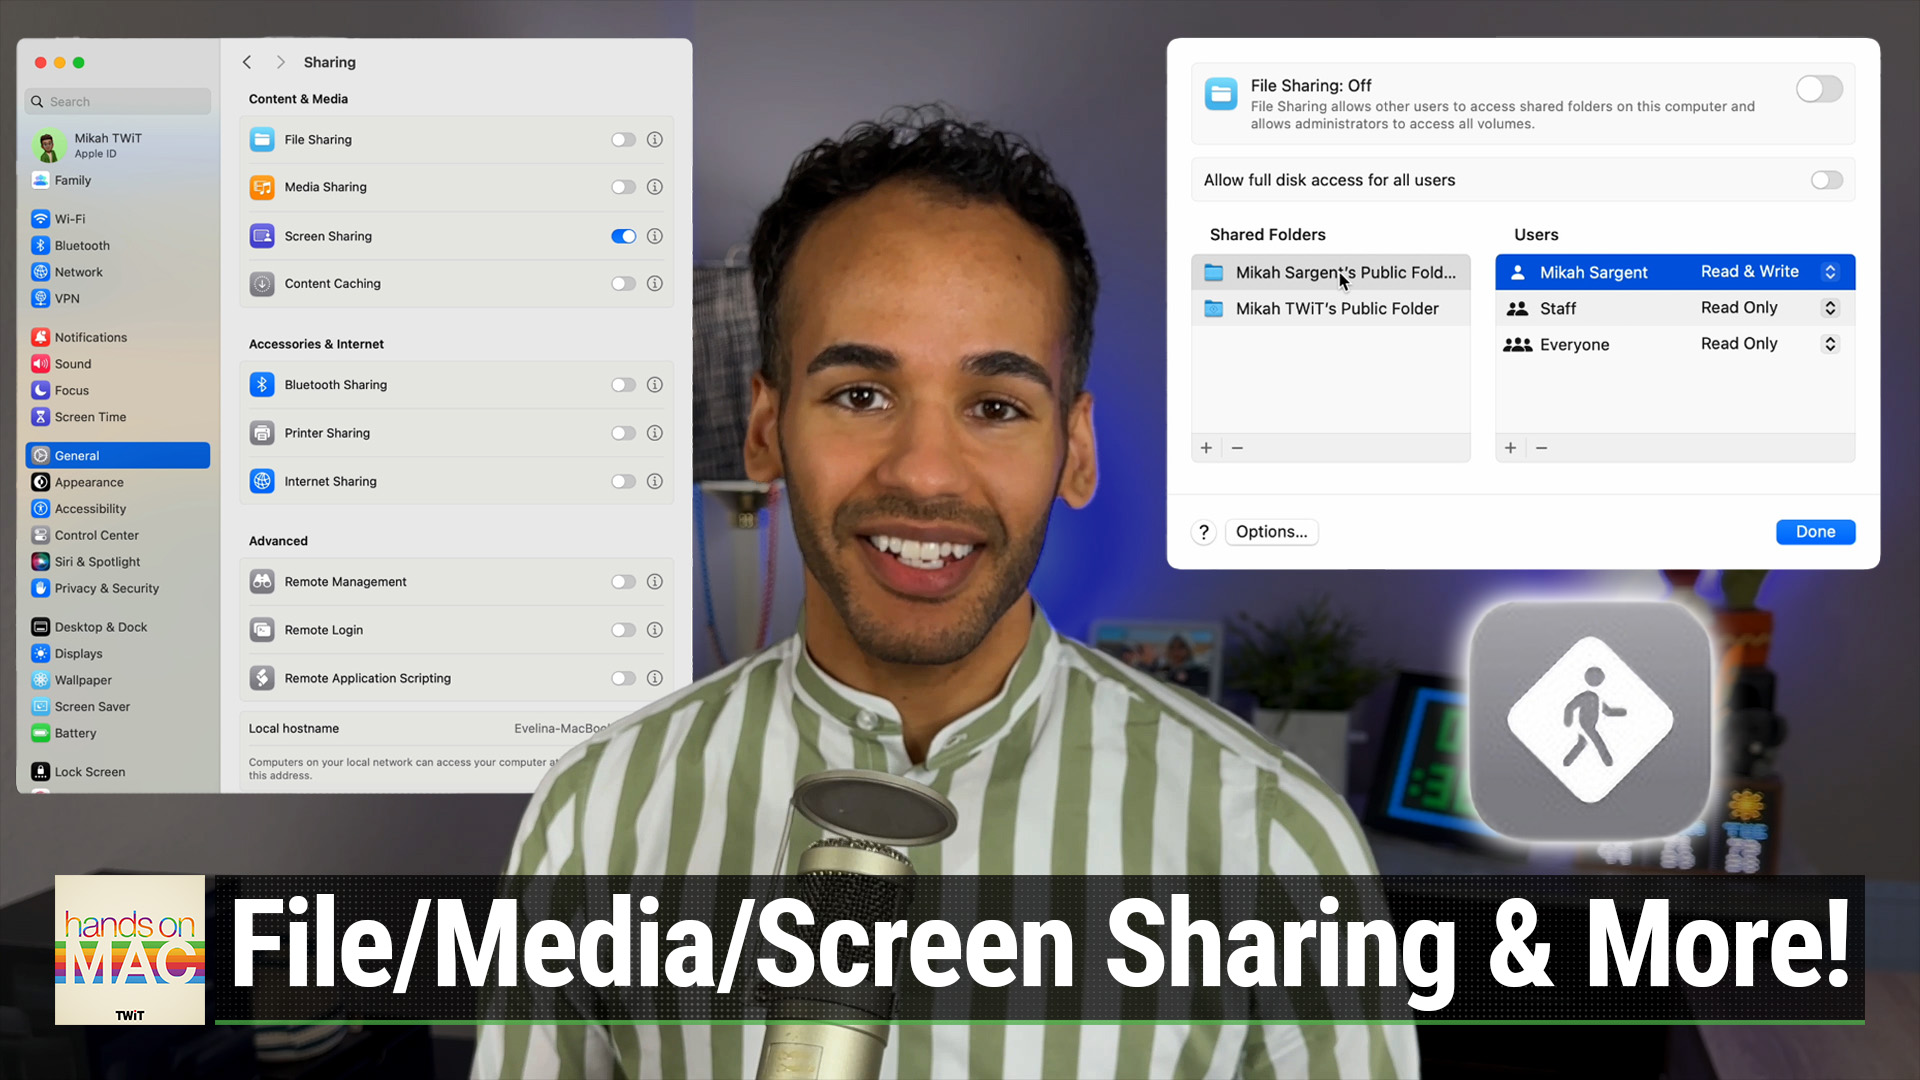 Network Sharing Settings in macOS (Hands-On Mac #131)